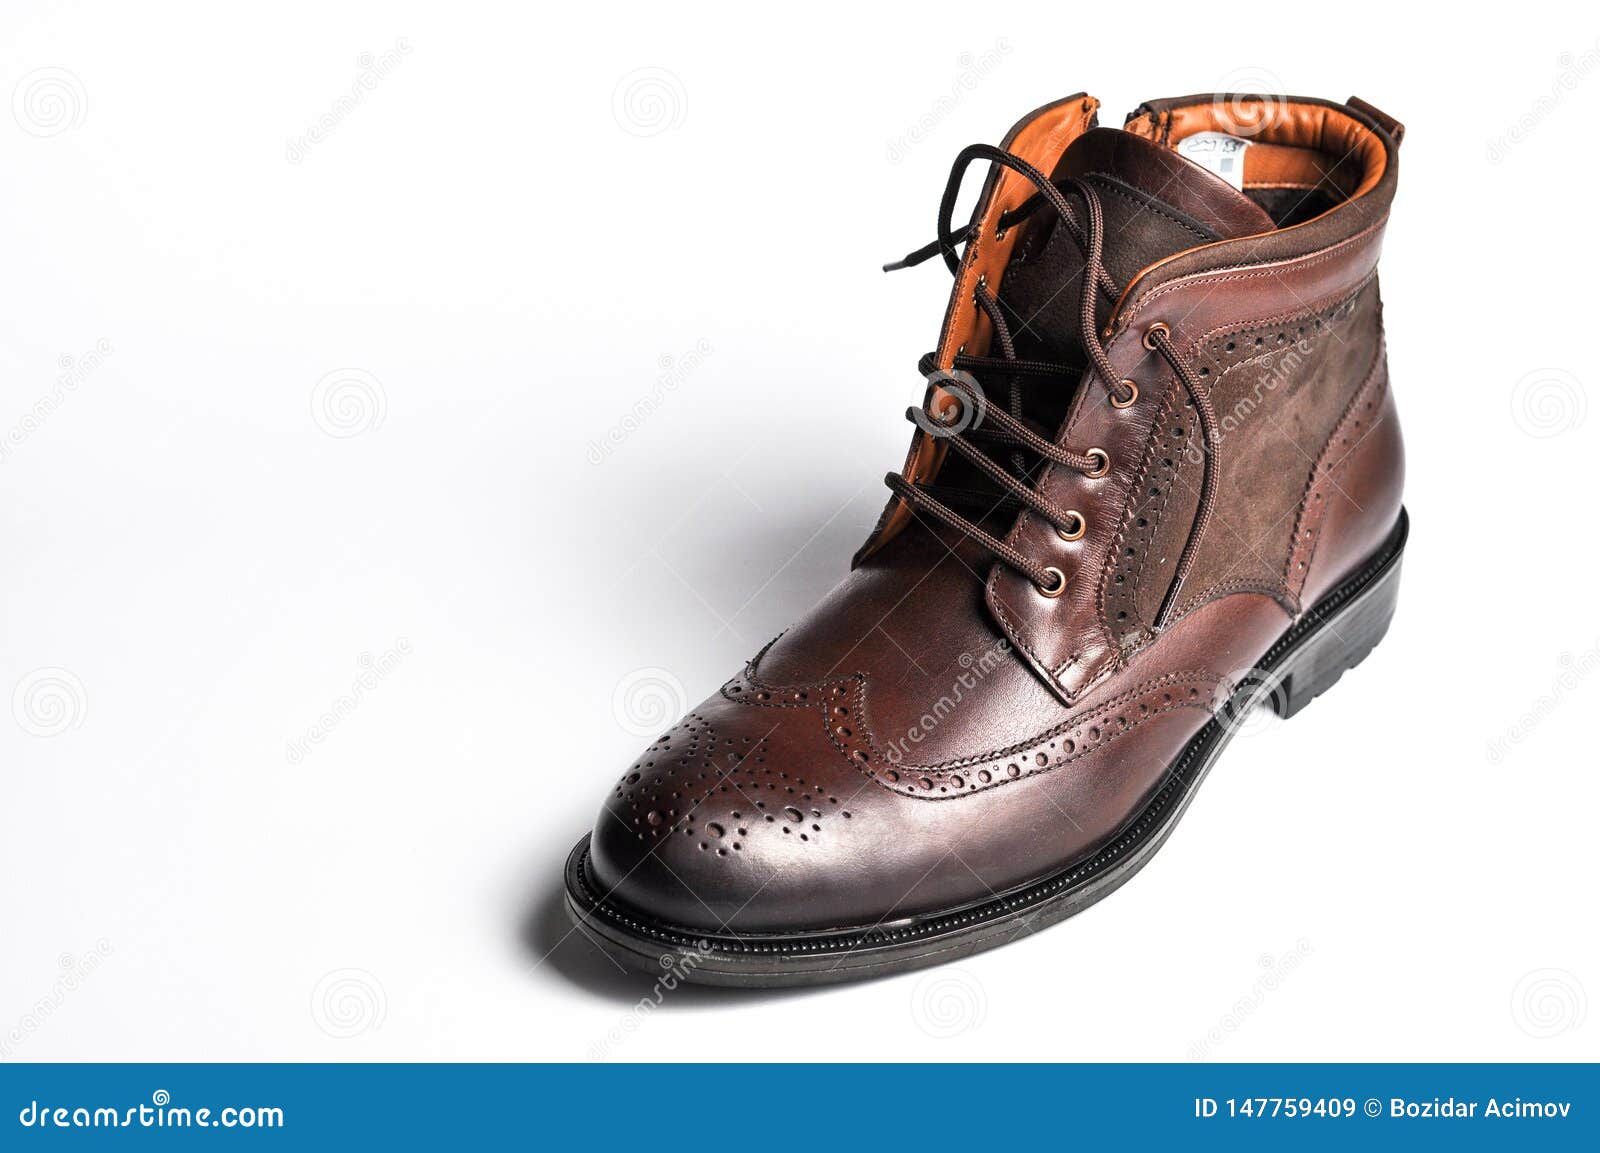 Men S Classic Brown Deep Shoes Isolated on White Background. Modern Men ...